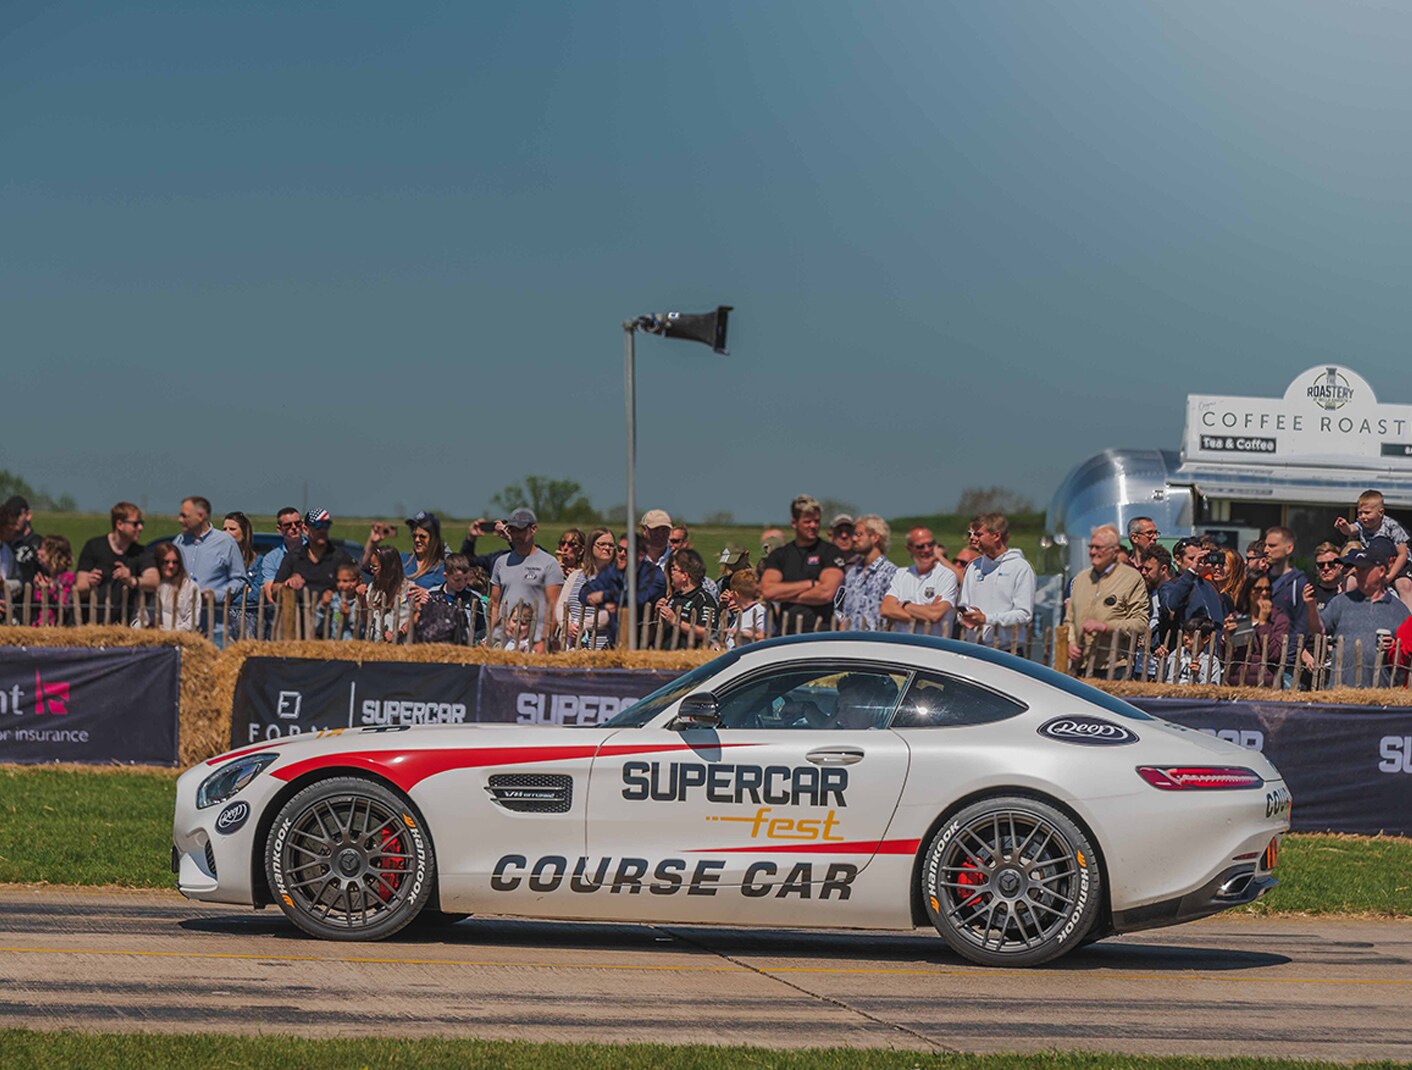 Hankook Tire continues partnership with Supercar Fest for 2022